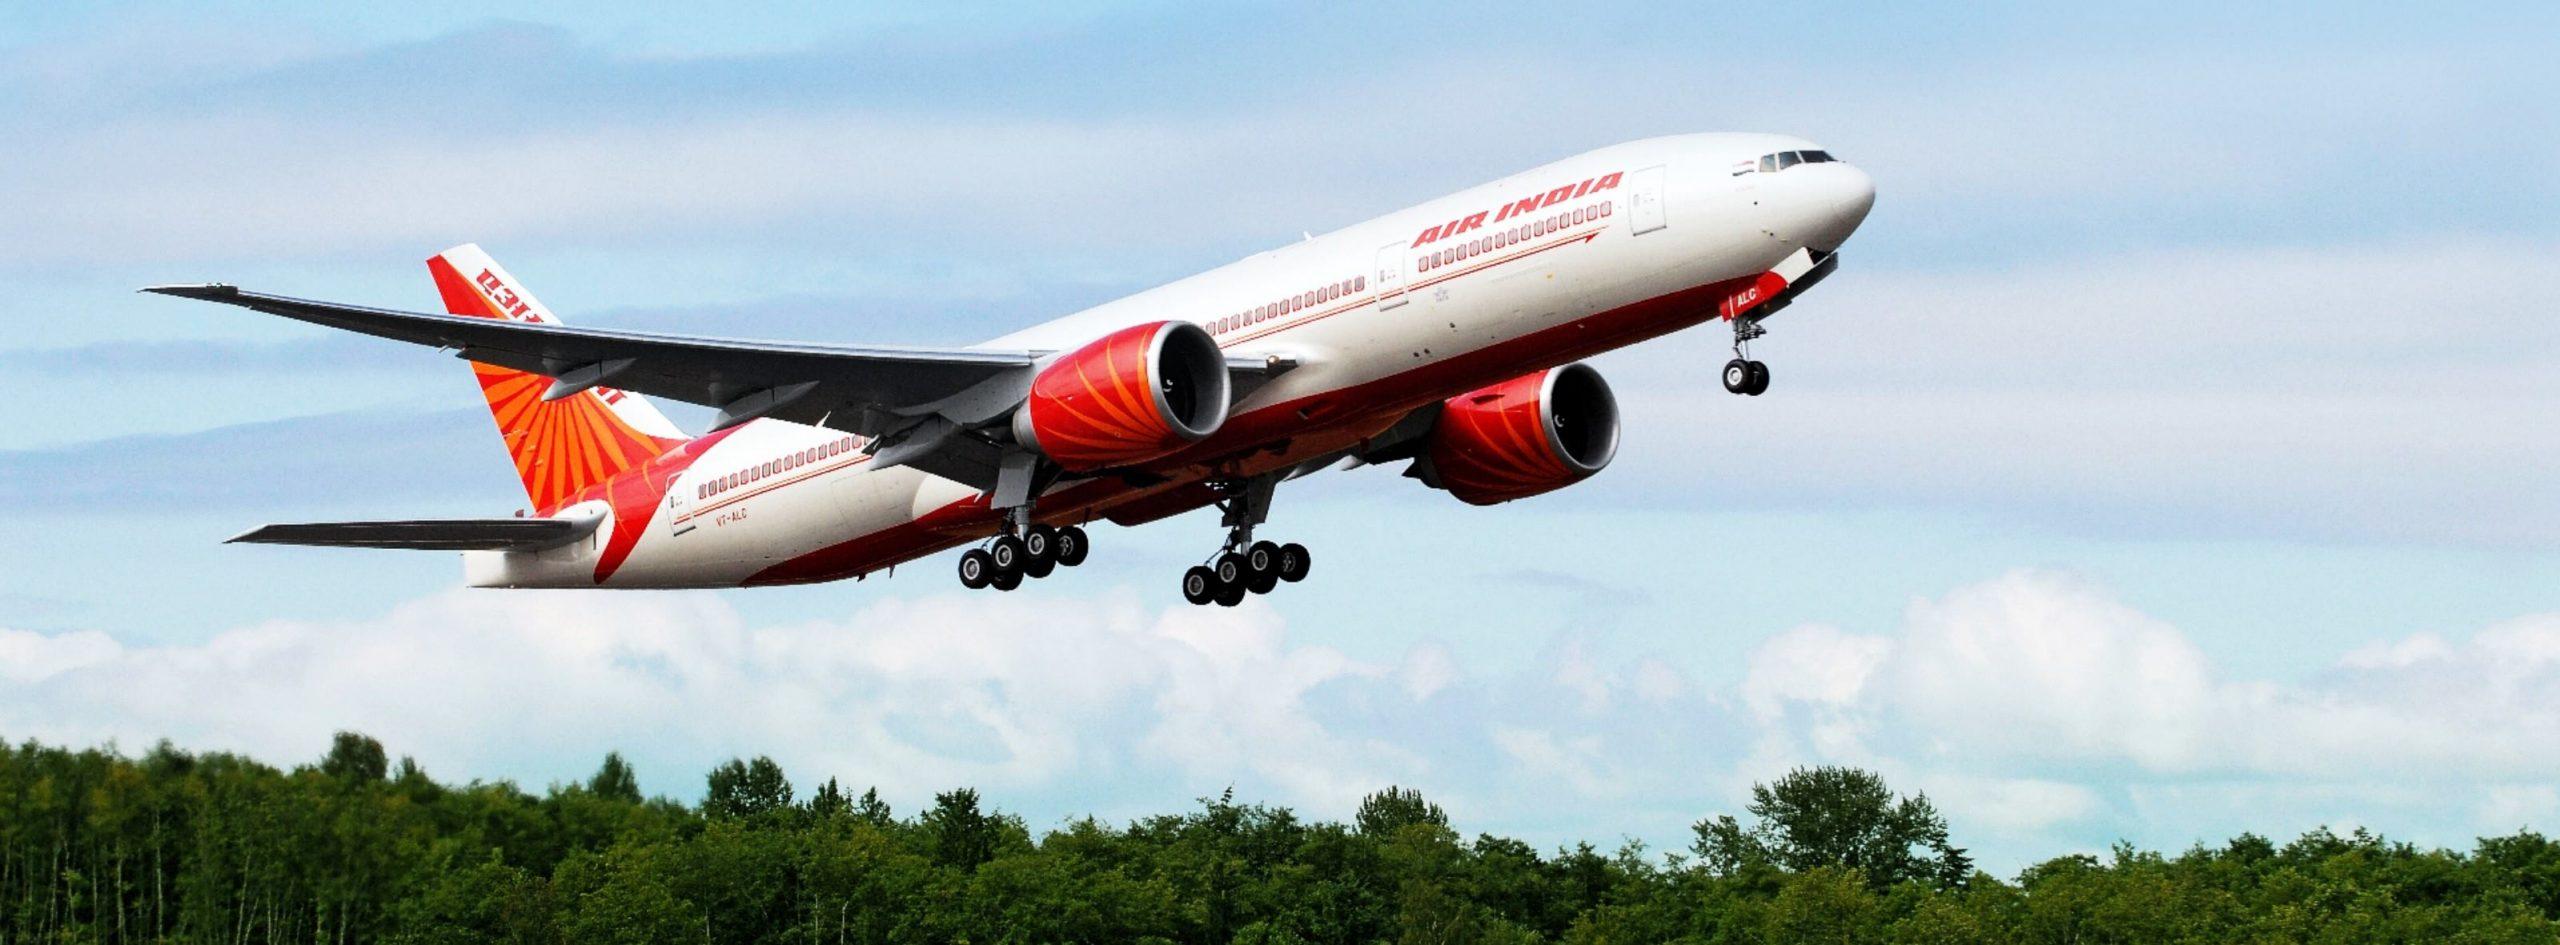 Air India has many assets, including slots at London's Heathrow airport, a fleet of more than 100 planes and thousands of trained pilots and crew. Photo: Facebook